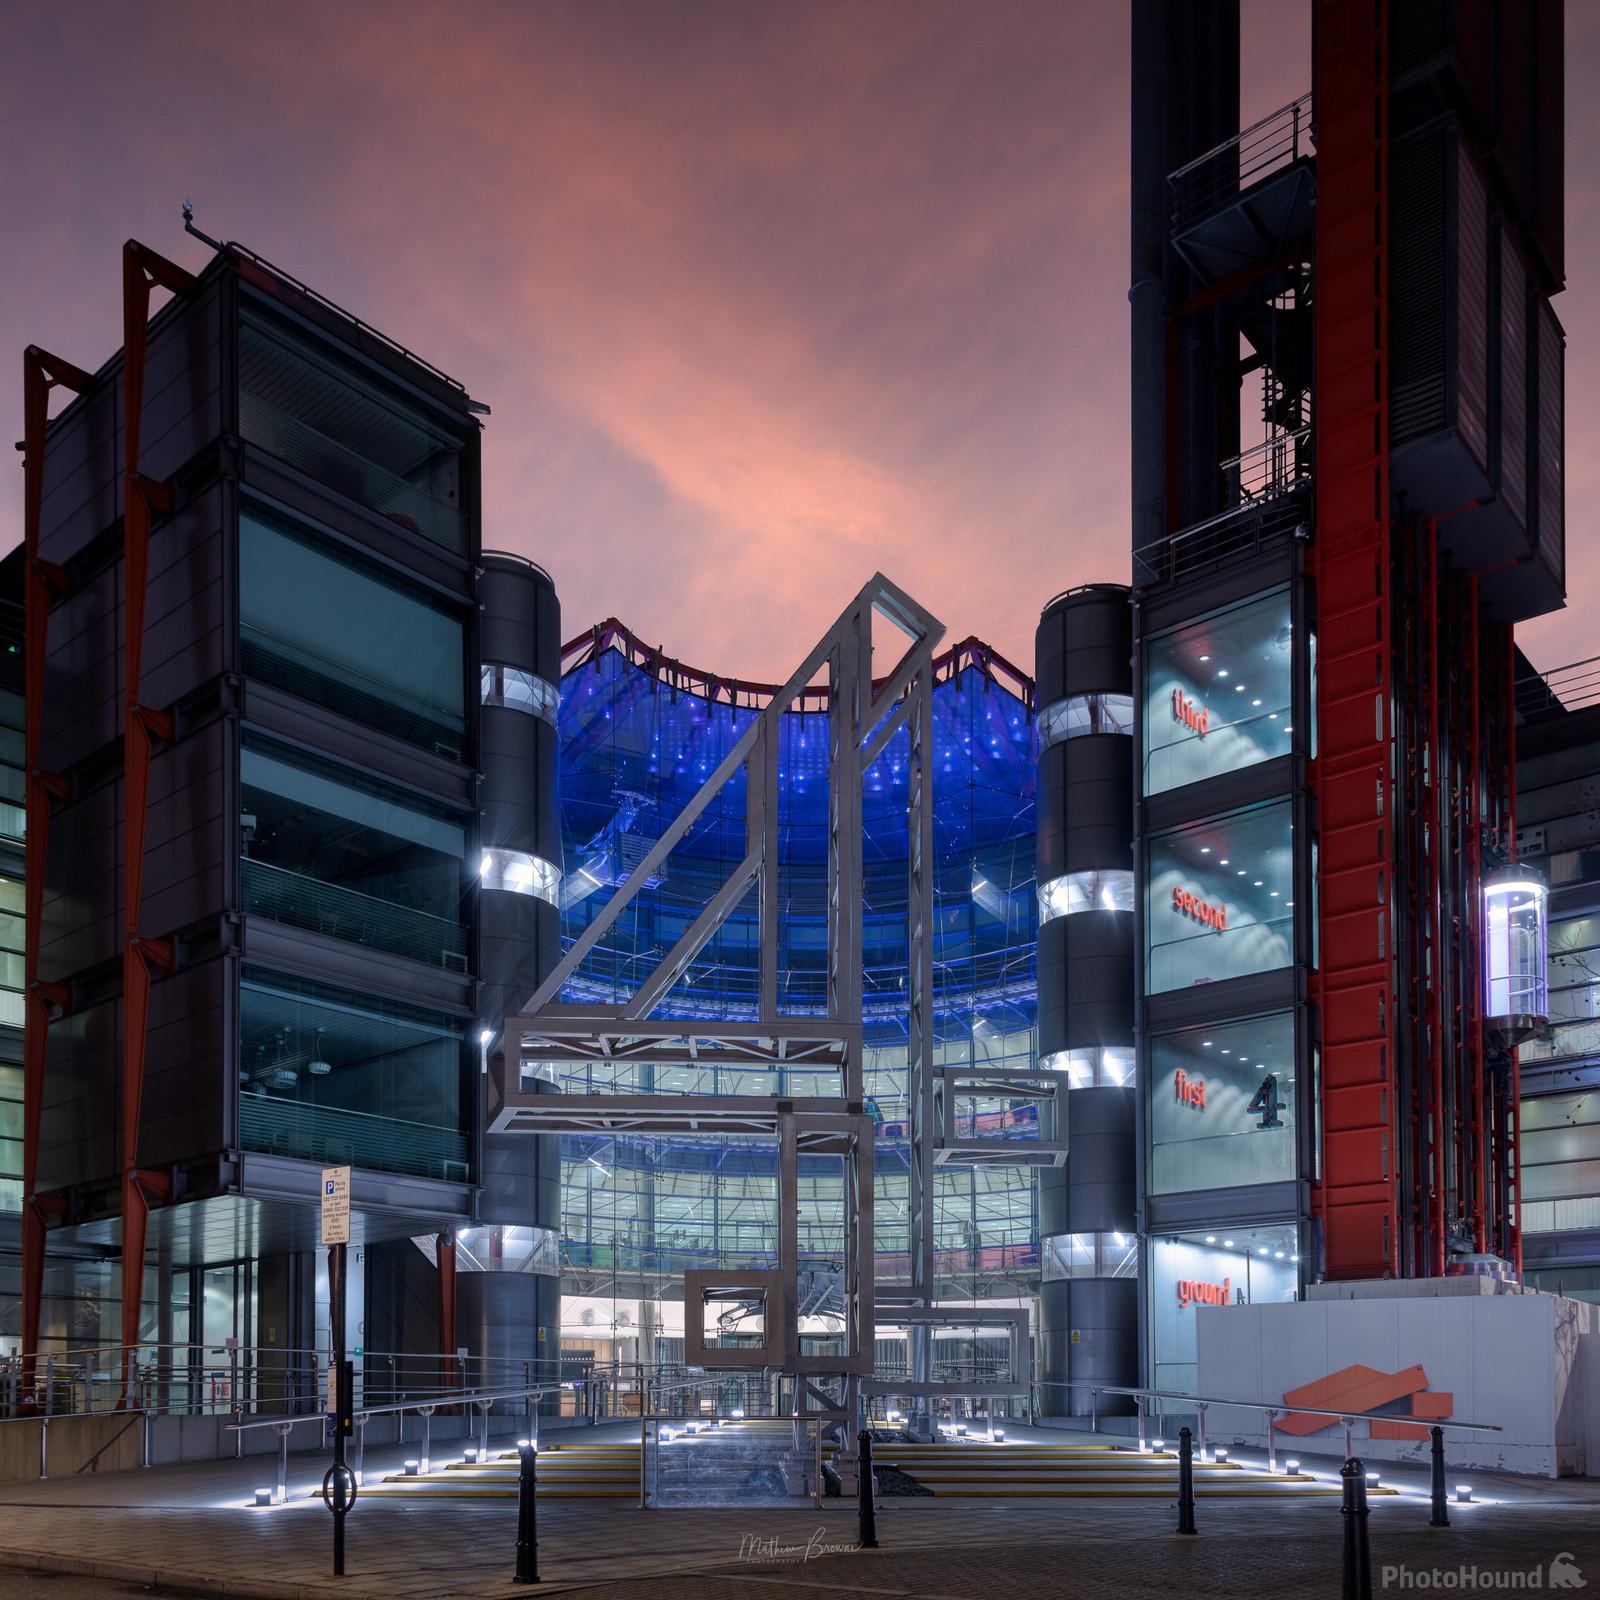 Image of Channel 4 HQ by Mathew Browne